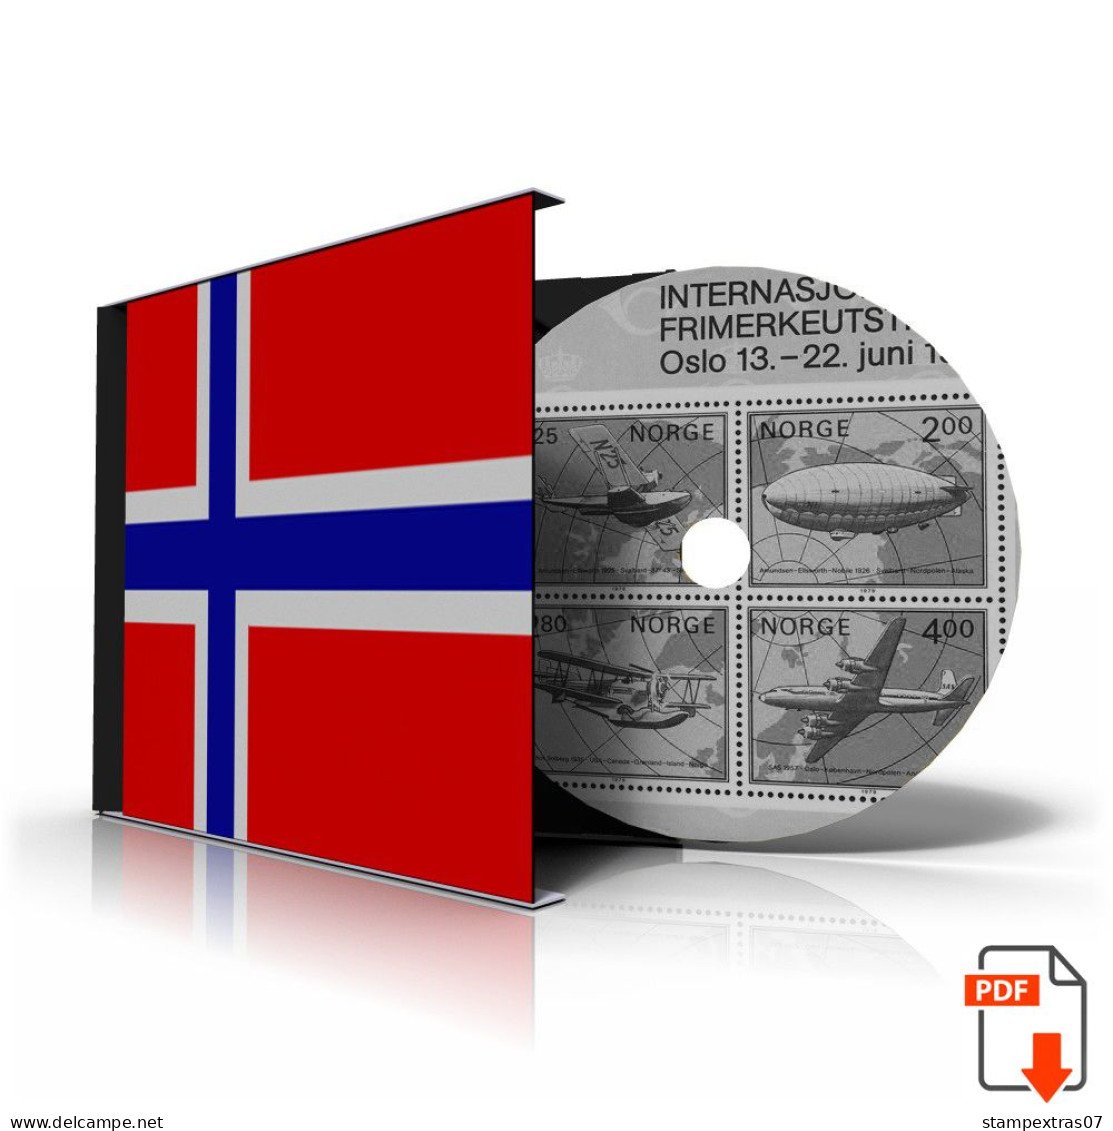 NORWAY 1855-2010 STAMP ALBUM PAGES (183 B&w Illustrated Pages) - Englisch